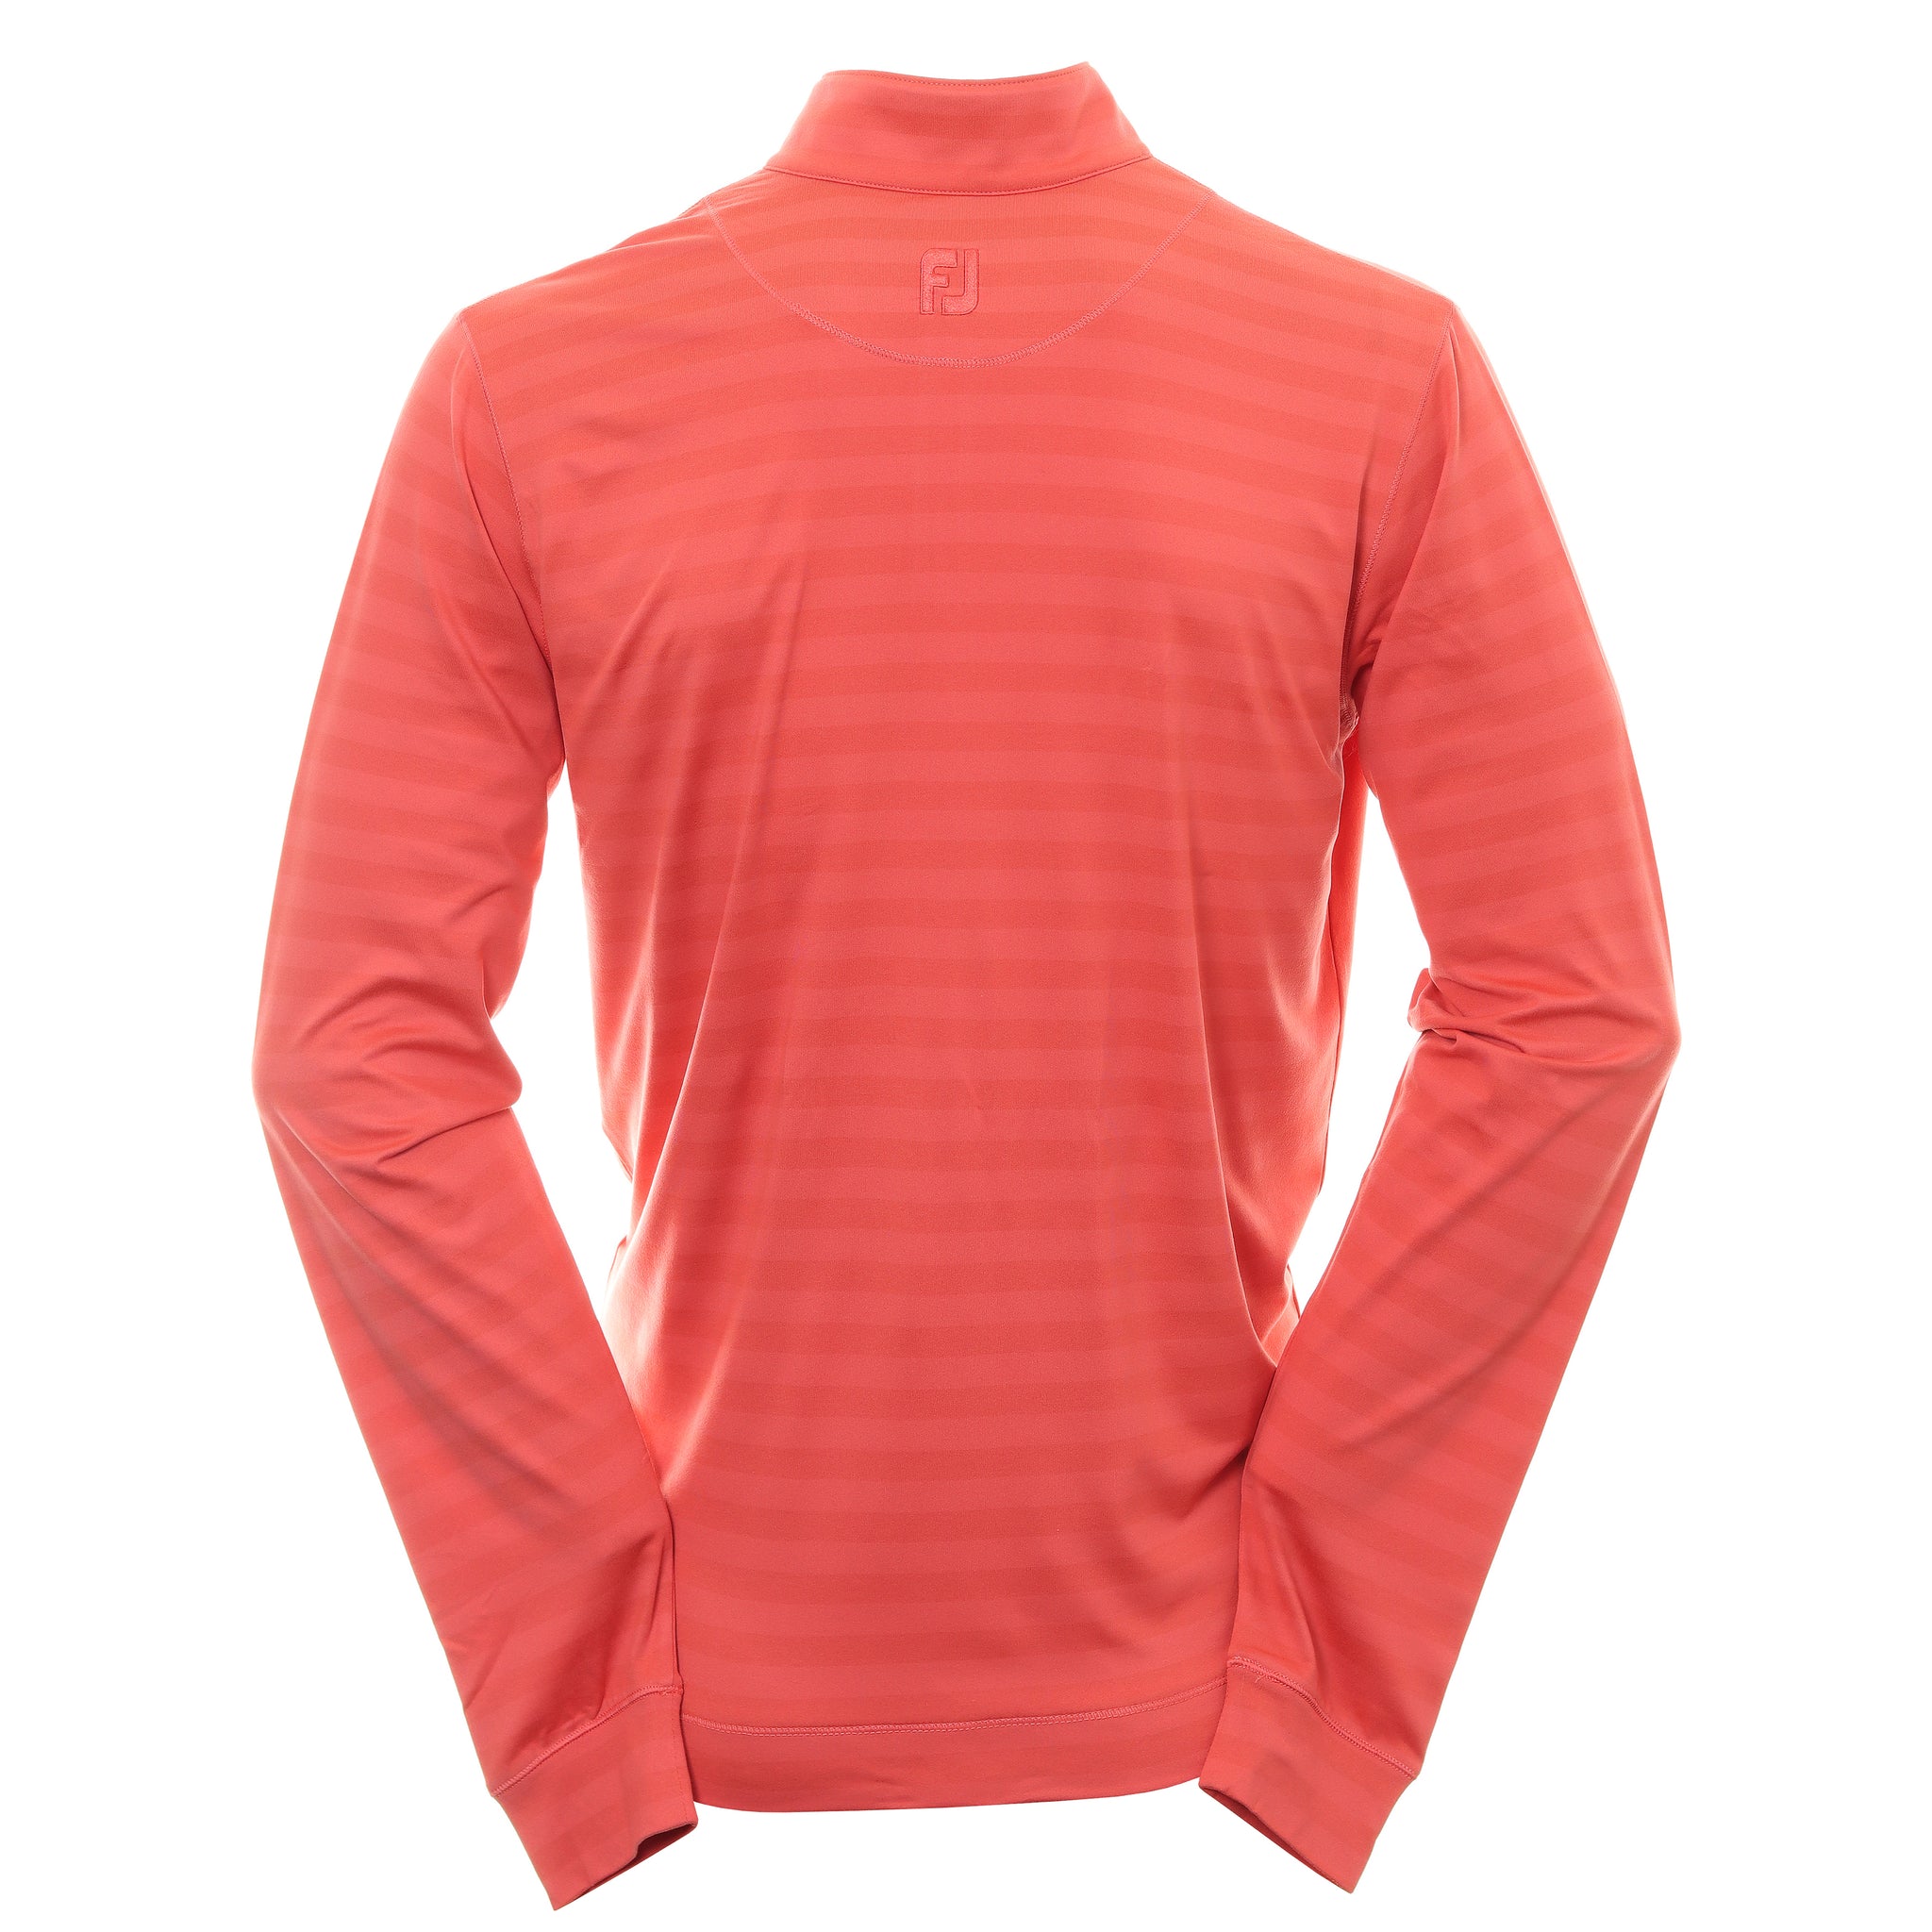 FootJoy Peached Tonal Stripe Chill Out Pullover